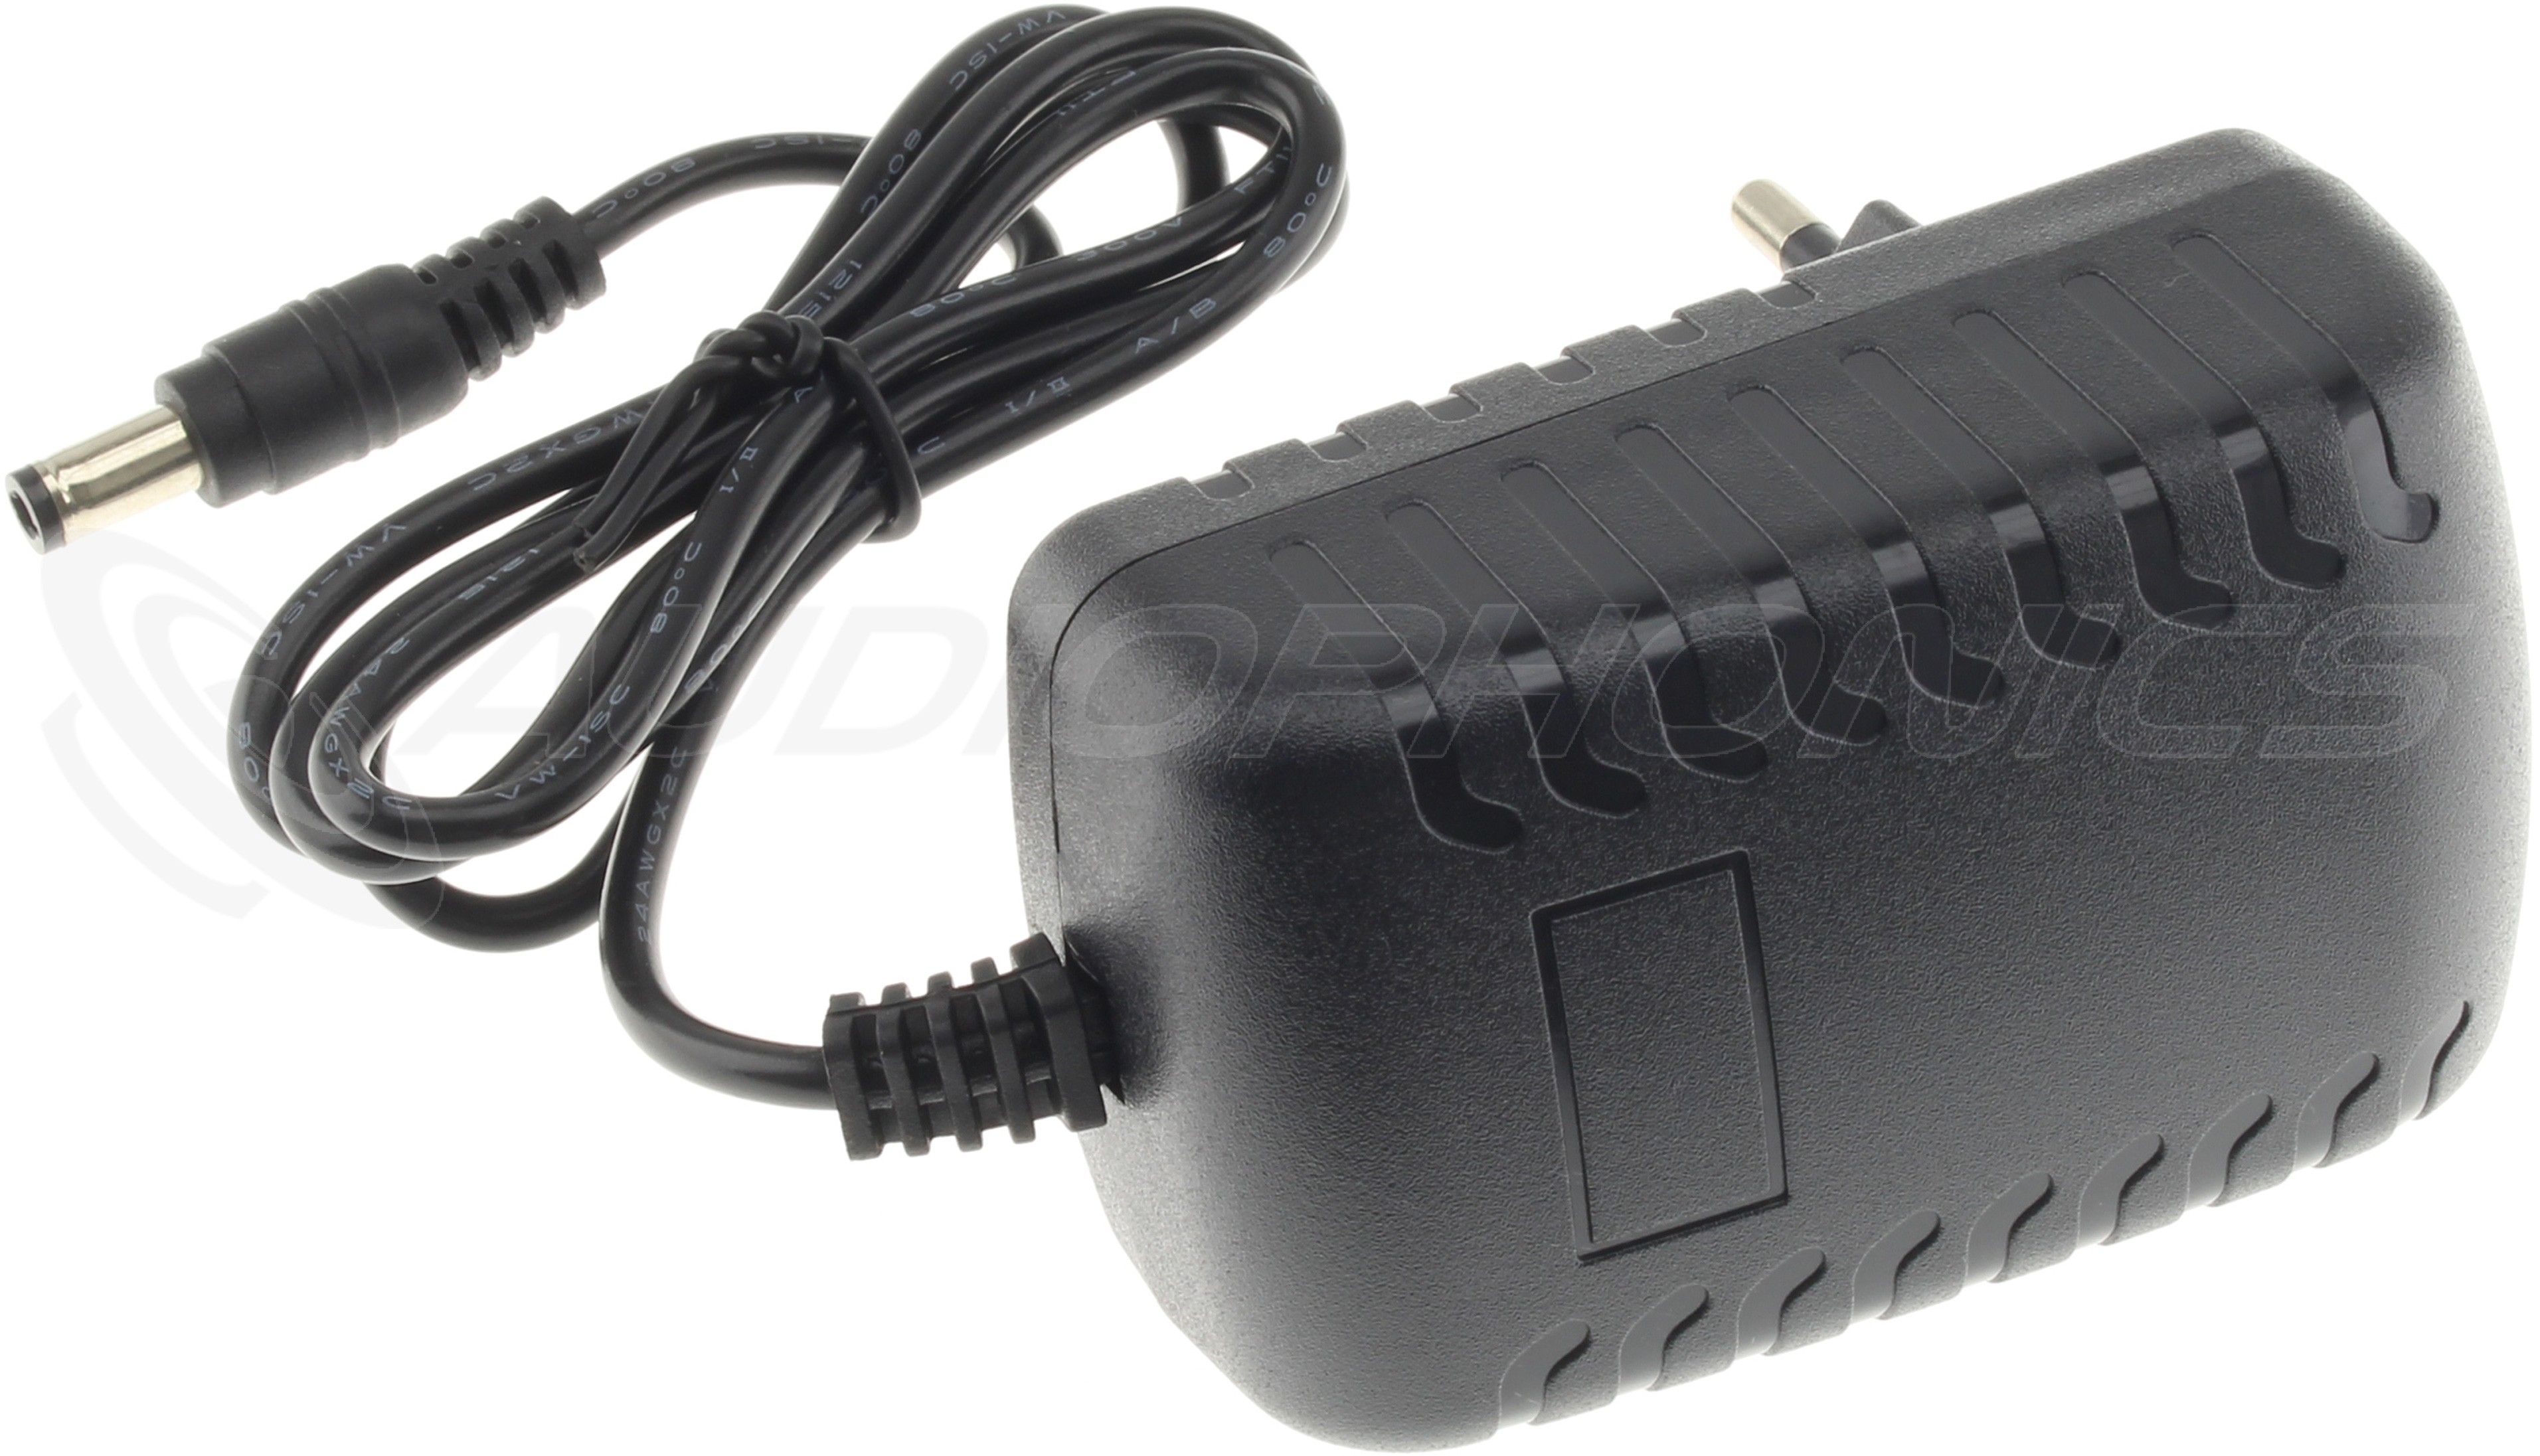 AC Adapter 100-240V to 6V 3A DC